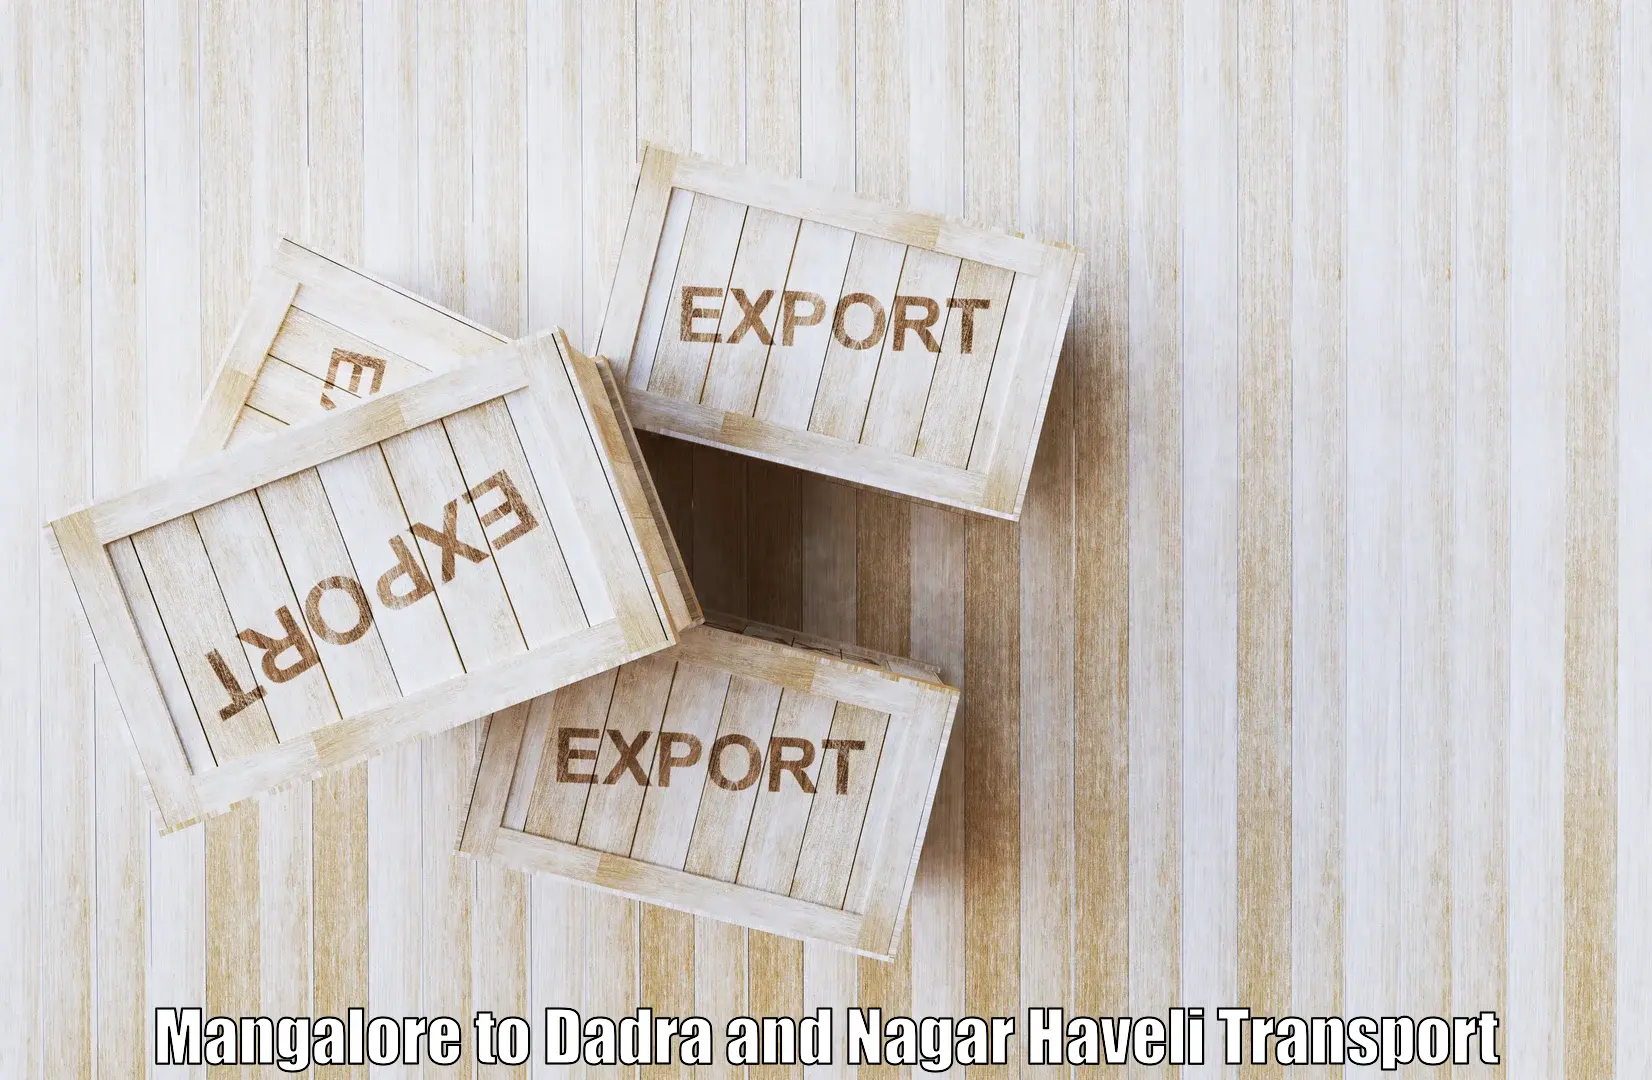 Cargo train transport services in Mangalore to Dadra and Nagar Haveli